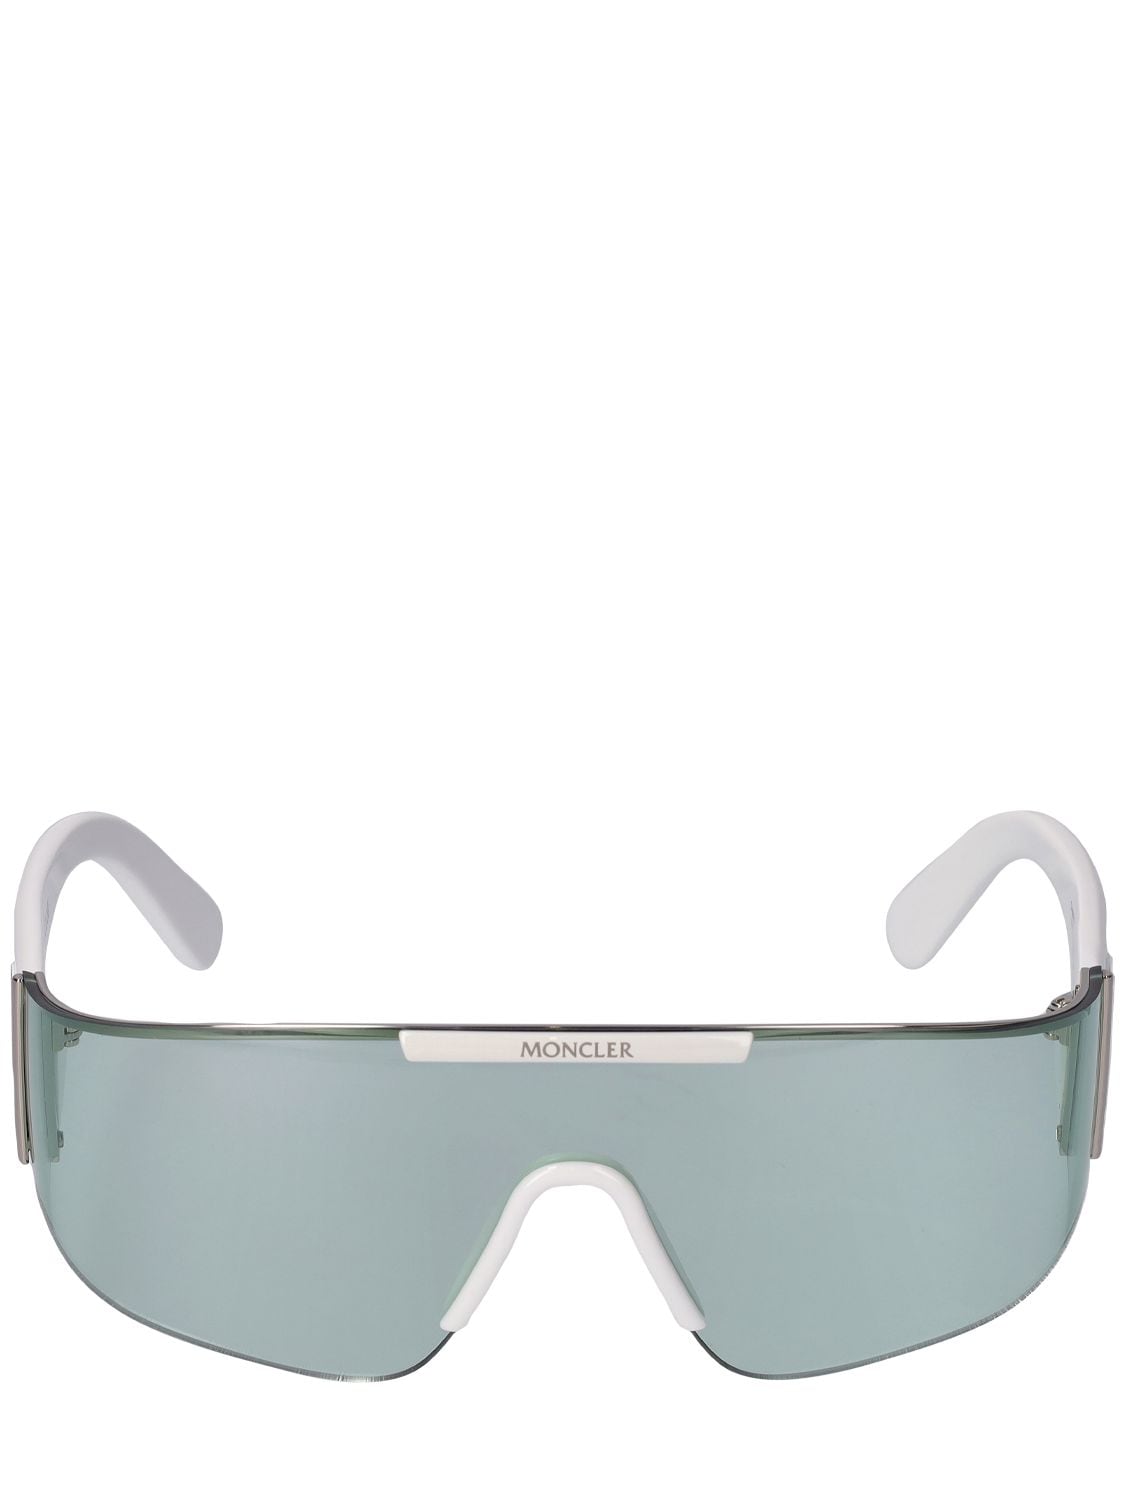 Moncler Ombrate Mask Metal Sunglasses In White,green | ModeSens